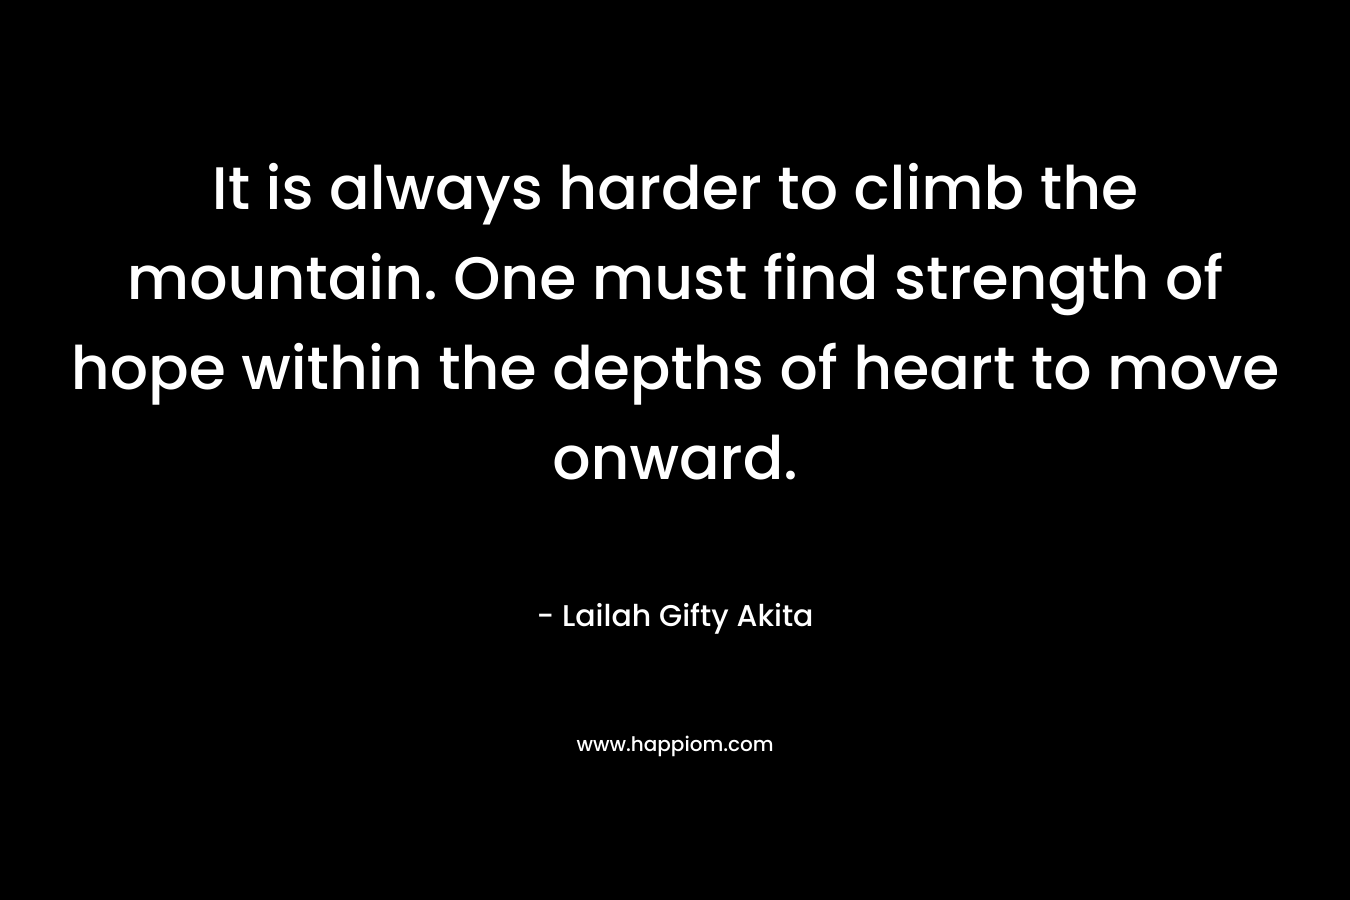 It is always harder to climb the mountain. One must find strength of hope within the depths of heart to move onward.